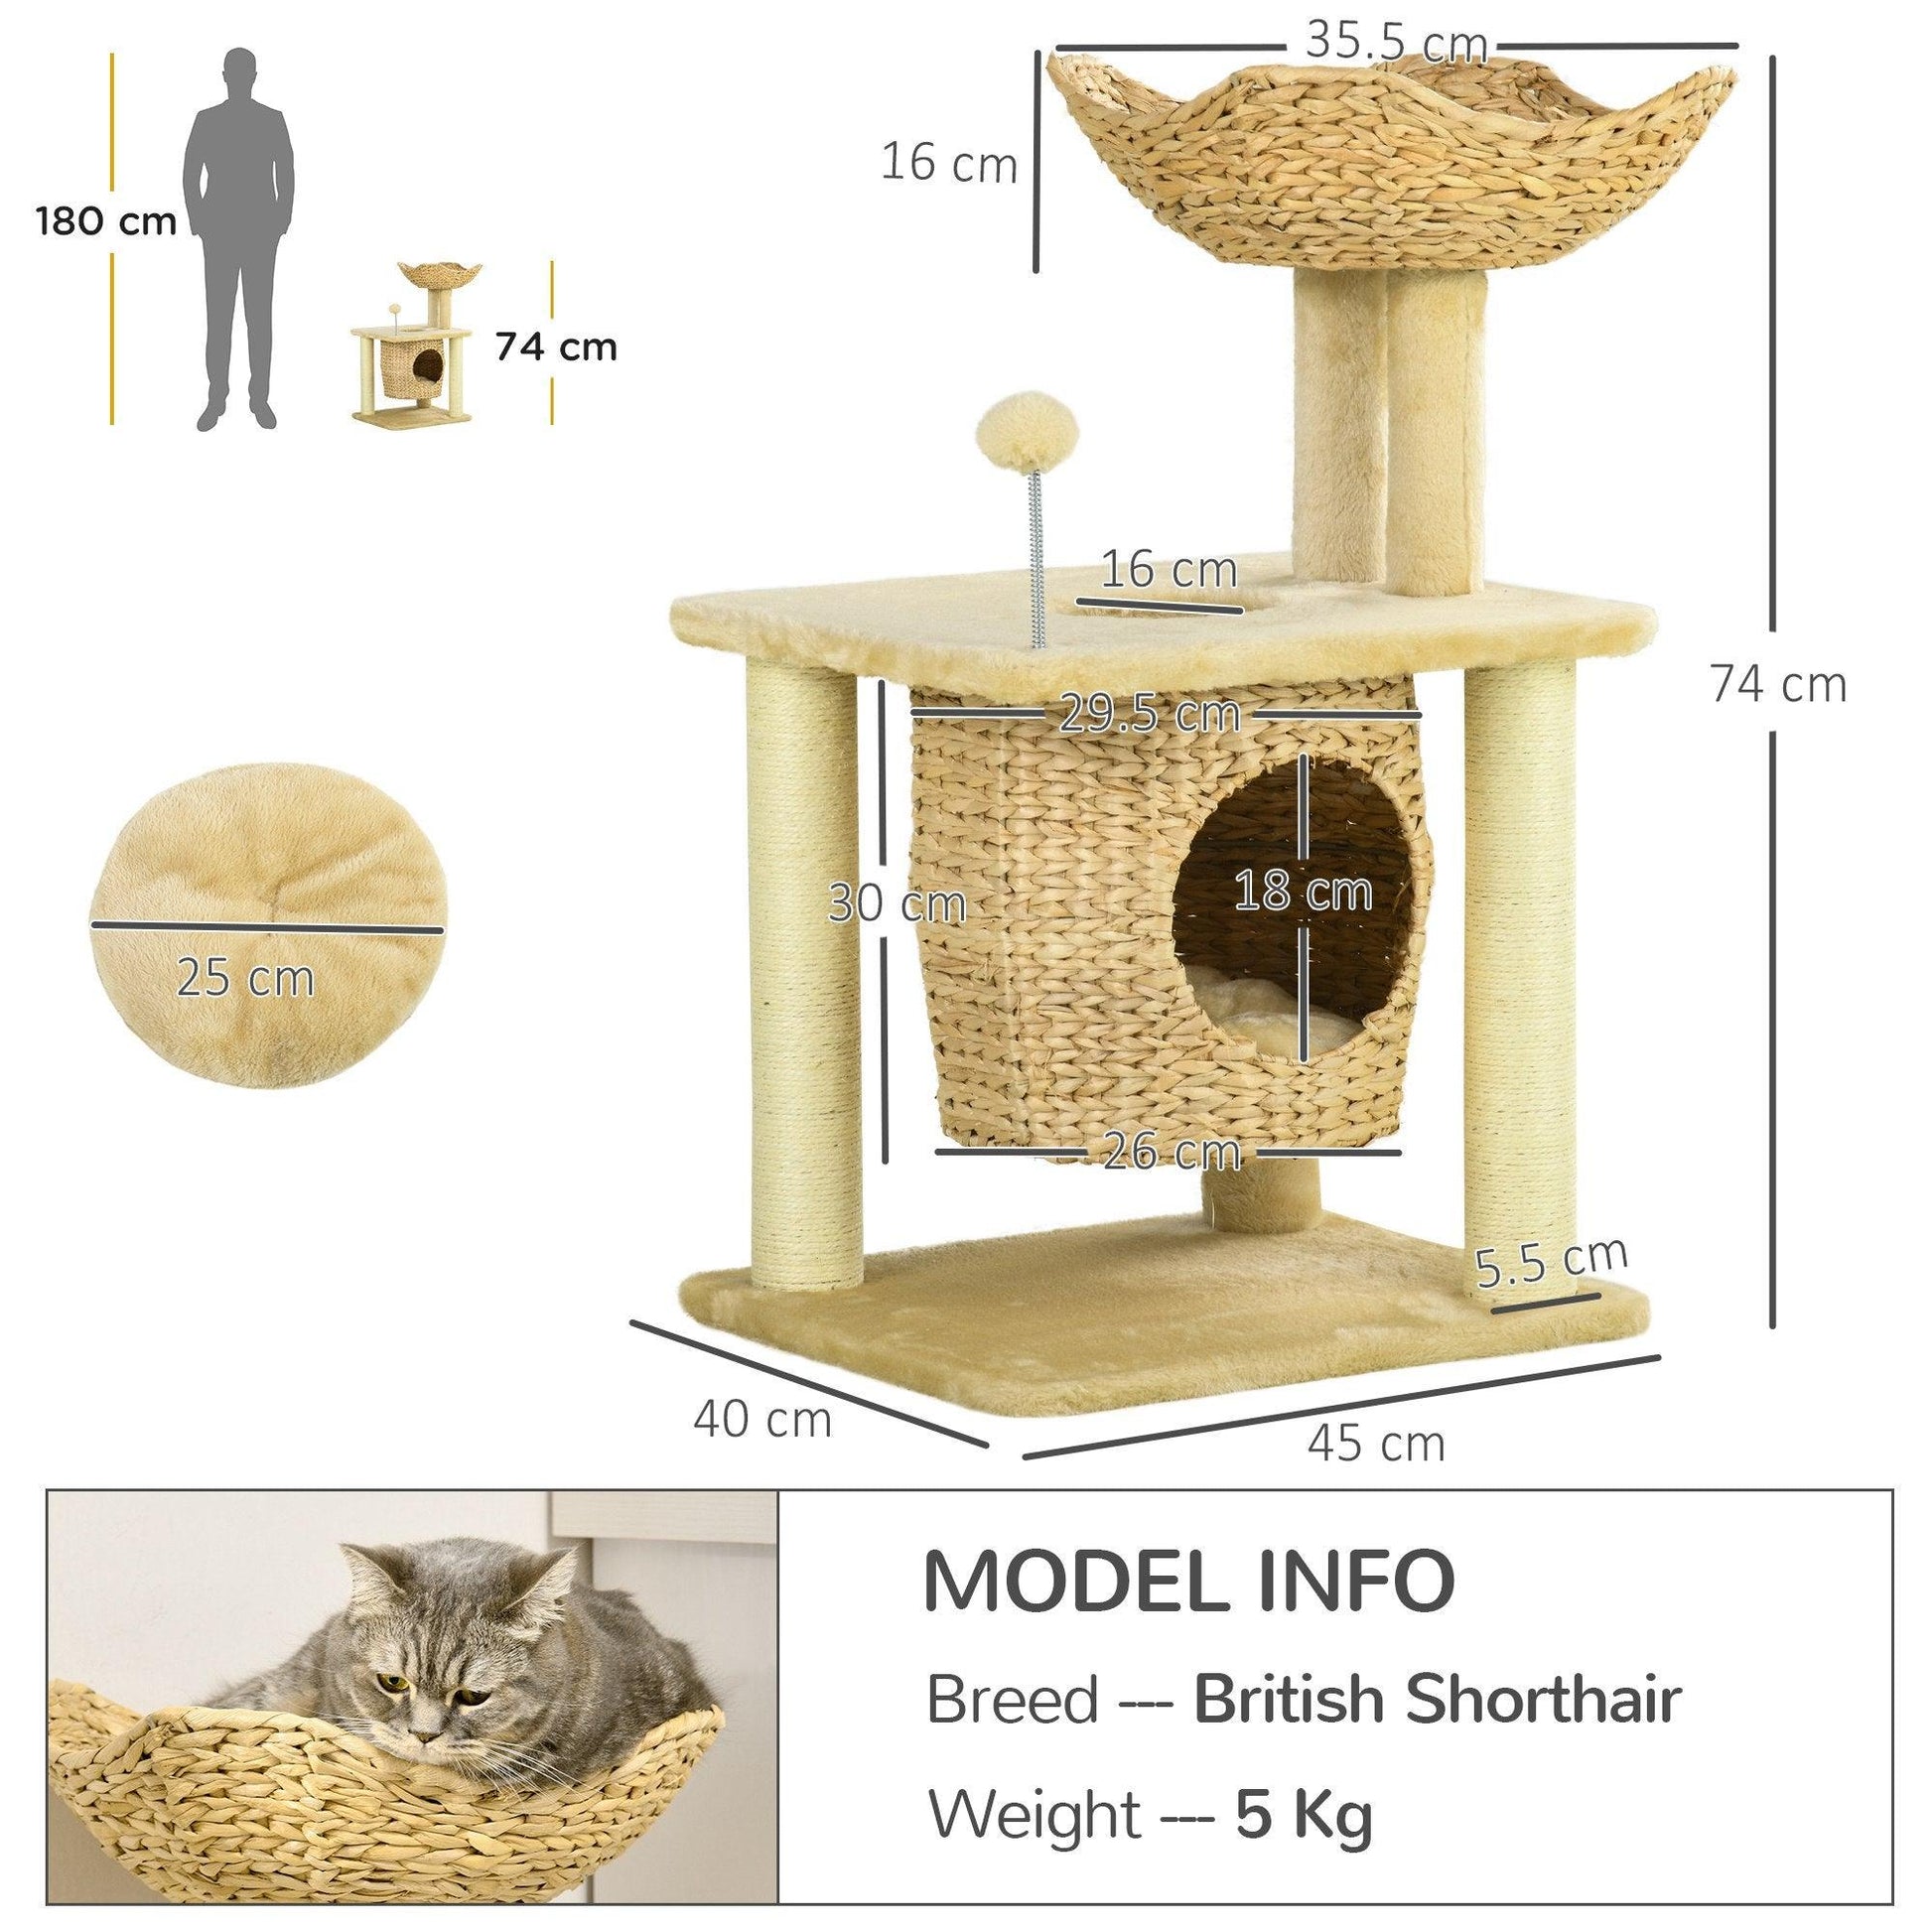 PawHut Cat Tree with Scratching Posts, Cat House, Bed, Washable Cushions - ALL4U RETAILER LTD